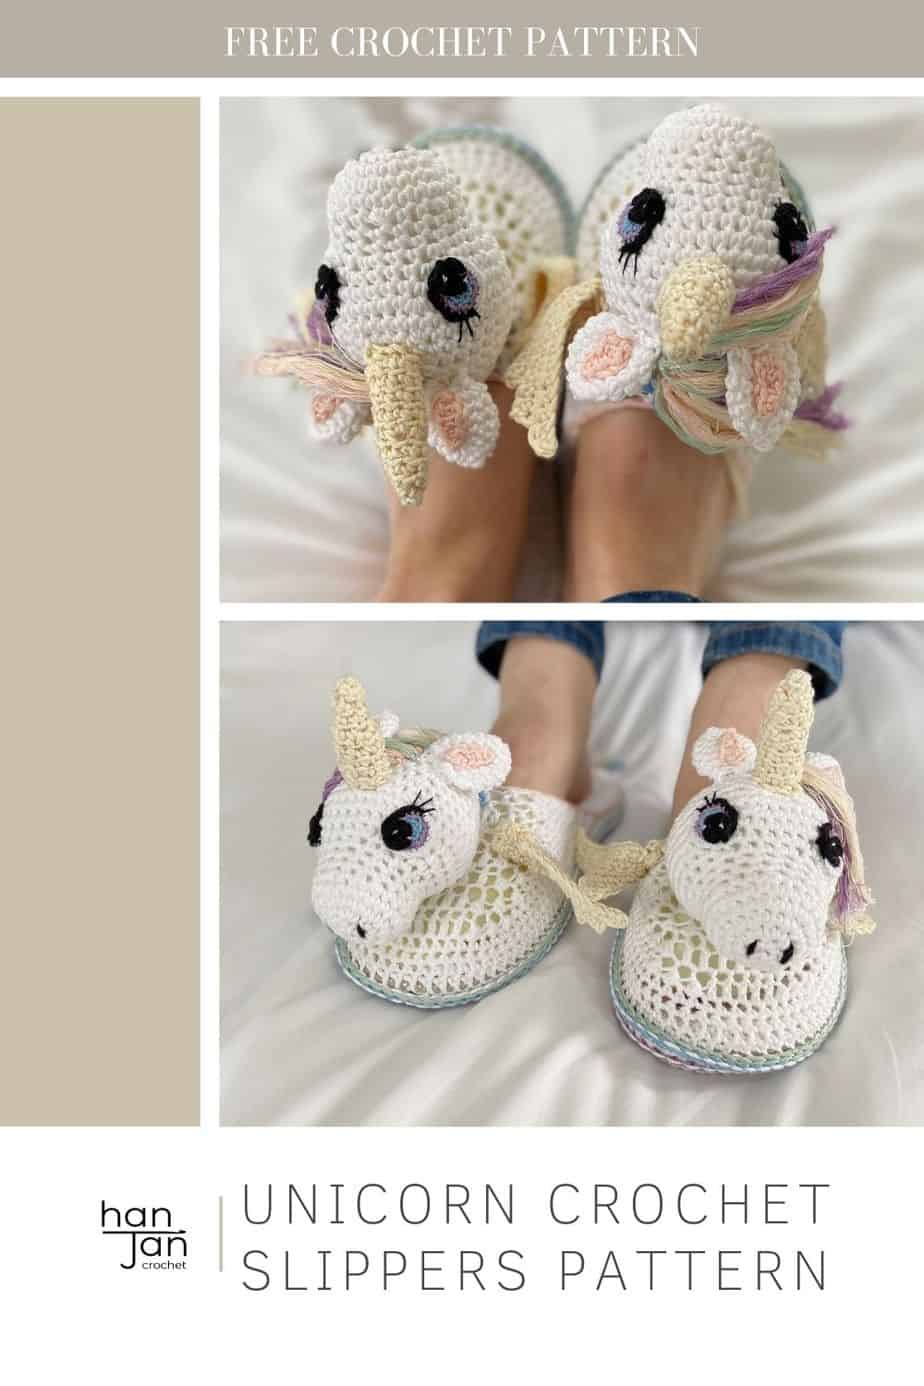 2 images showing crochet unicorn slippers in white